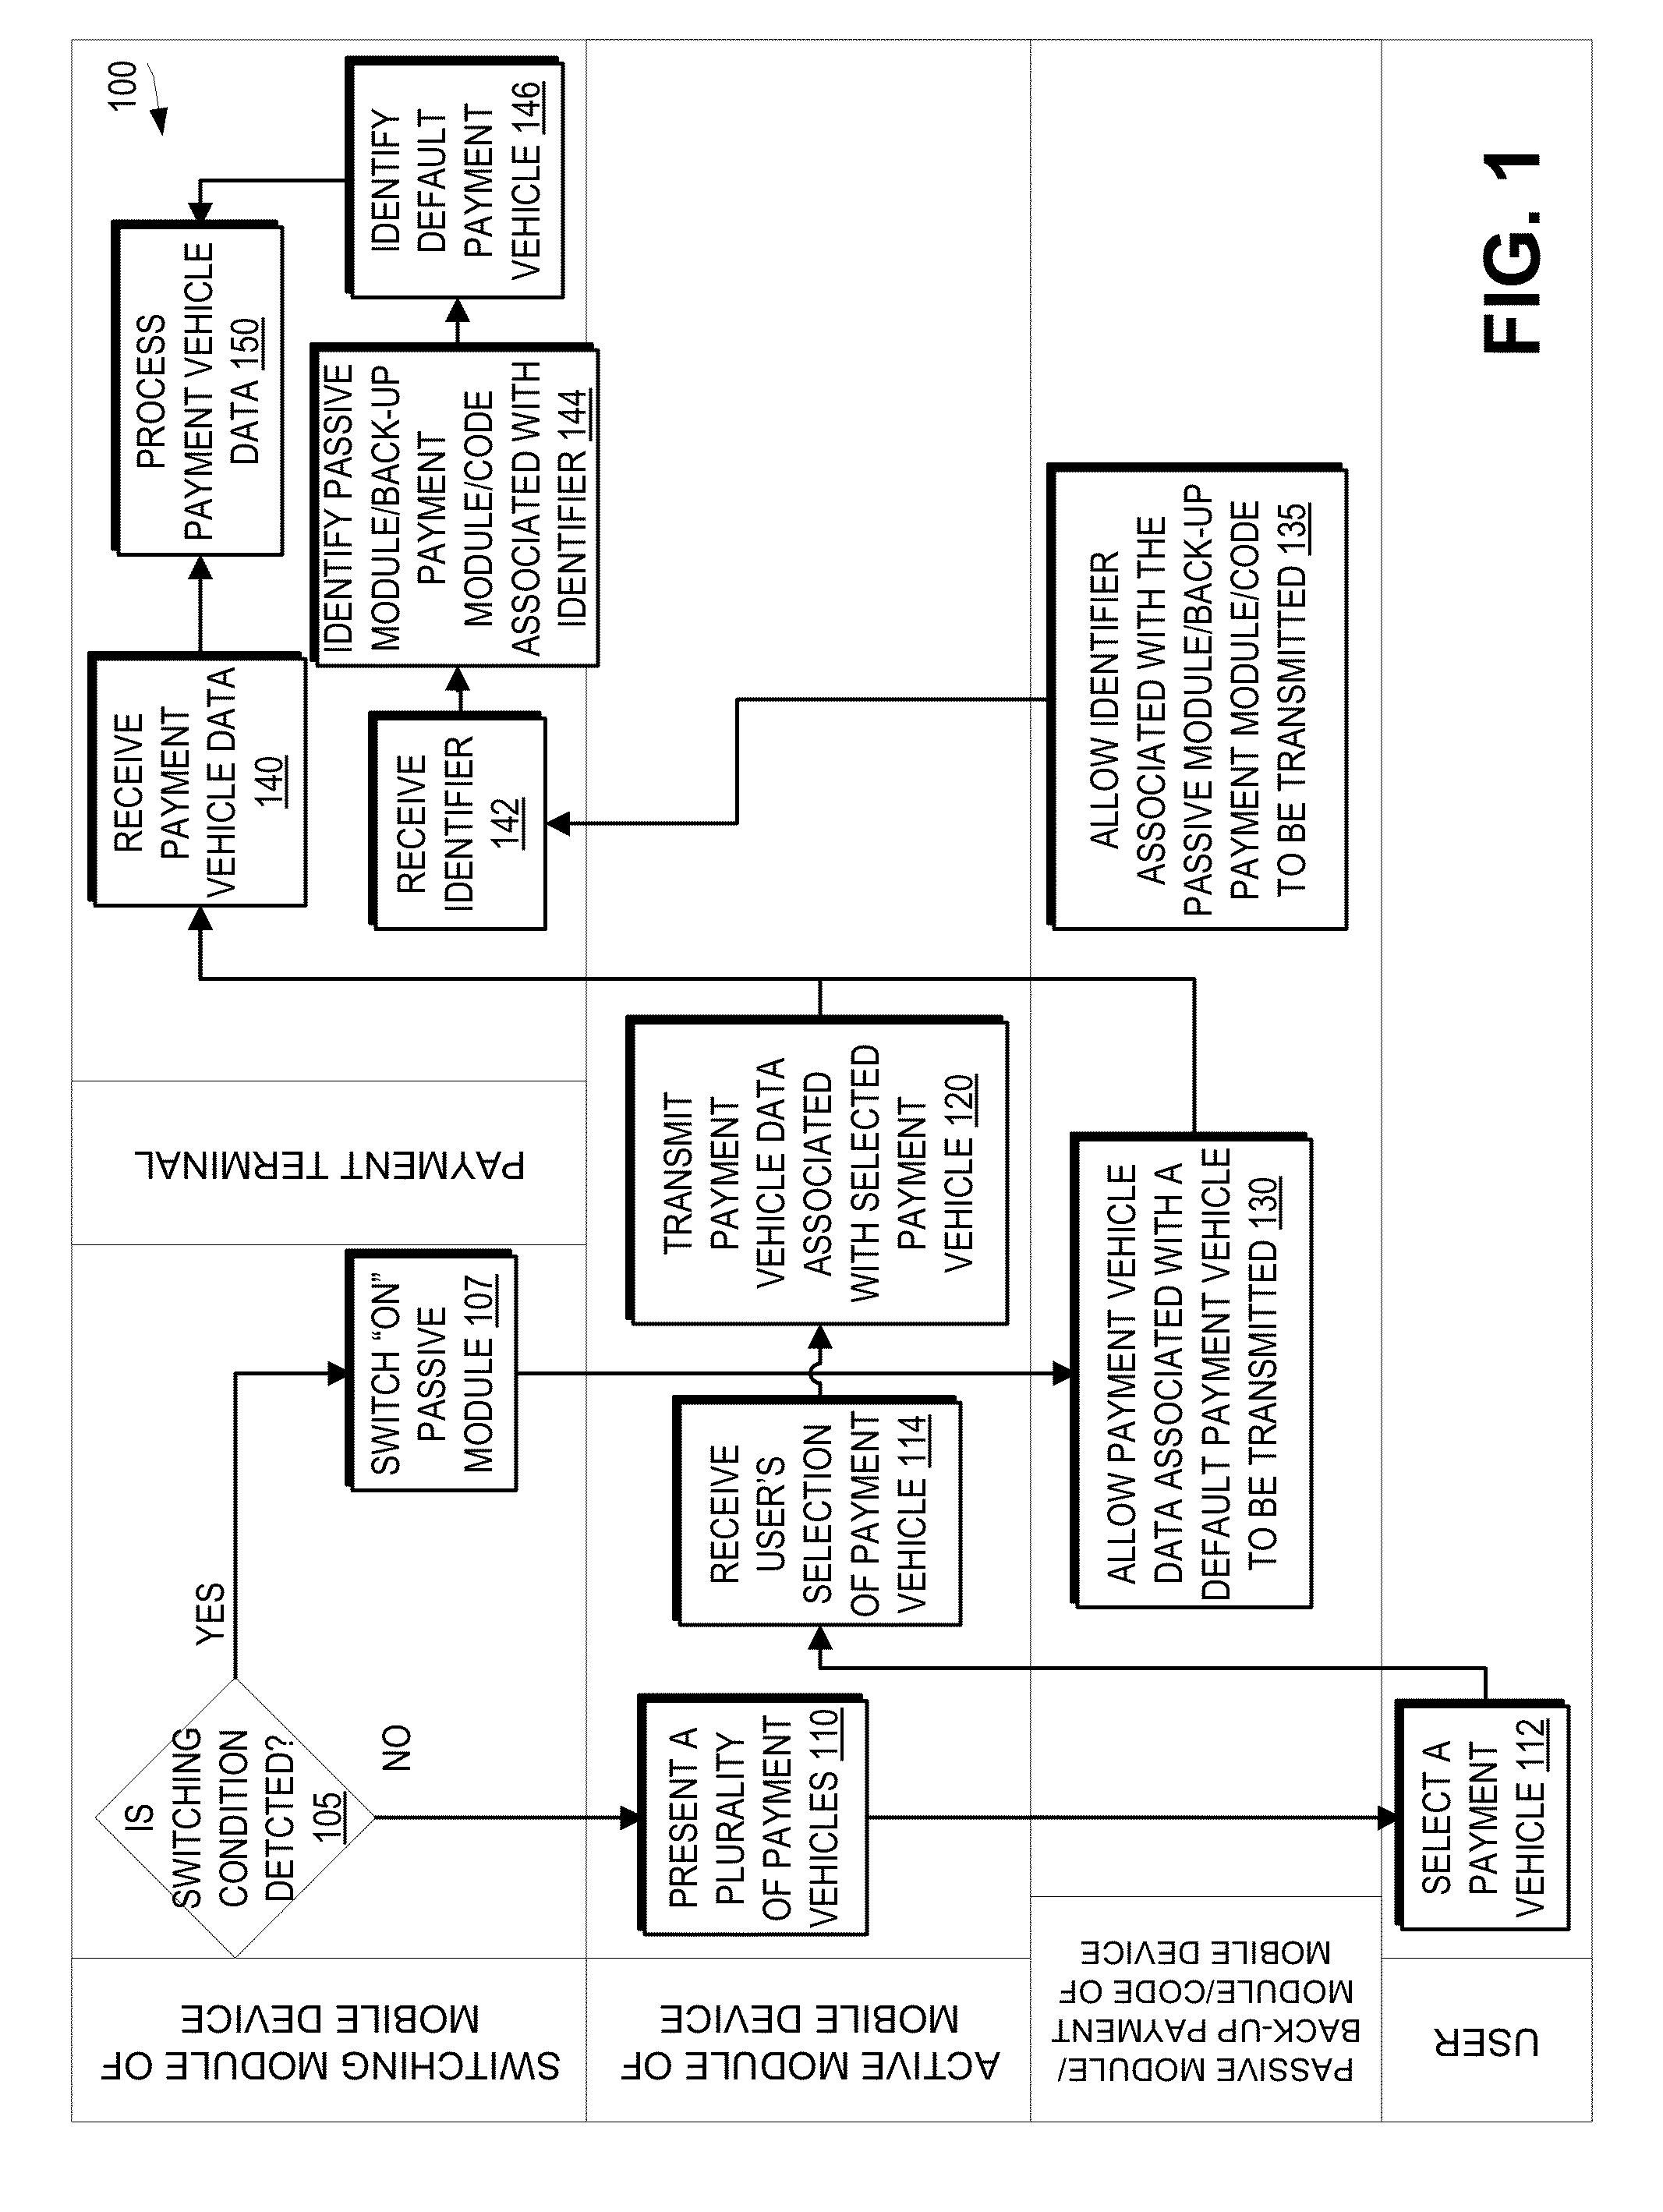 Mobile apparatus with back-up payment system